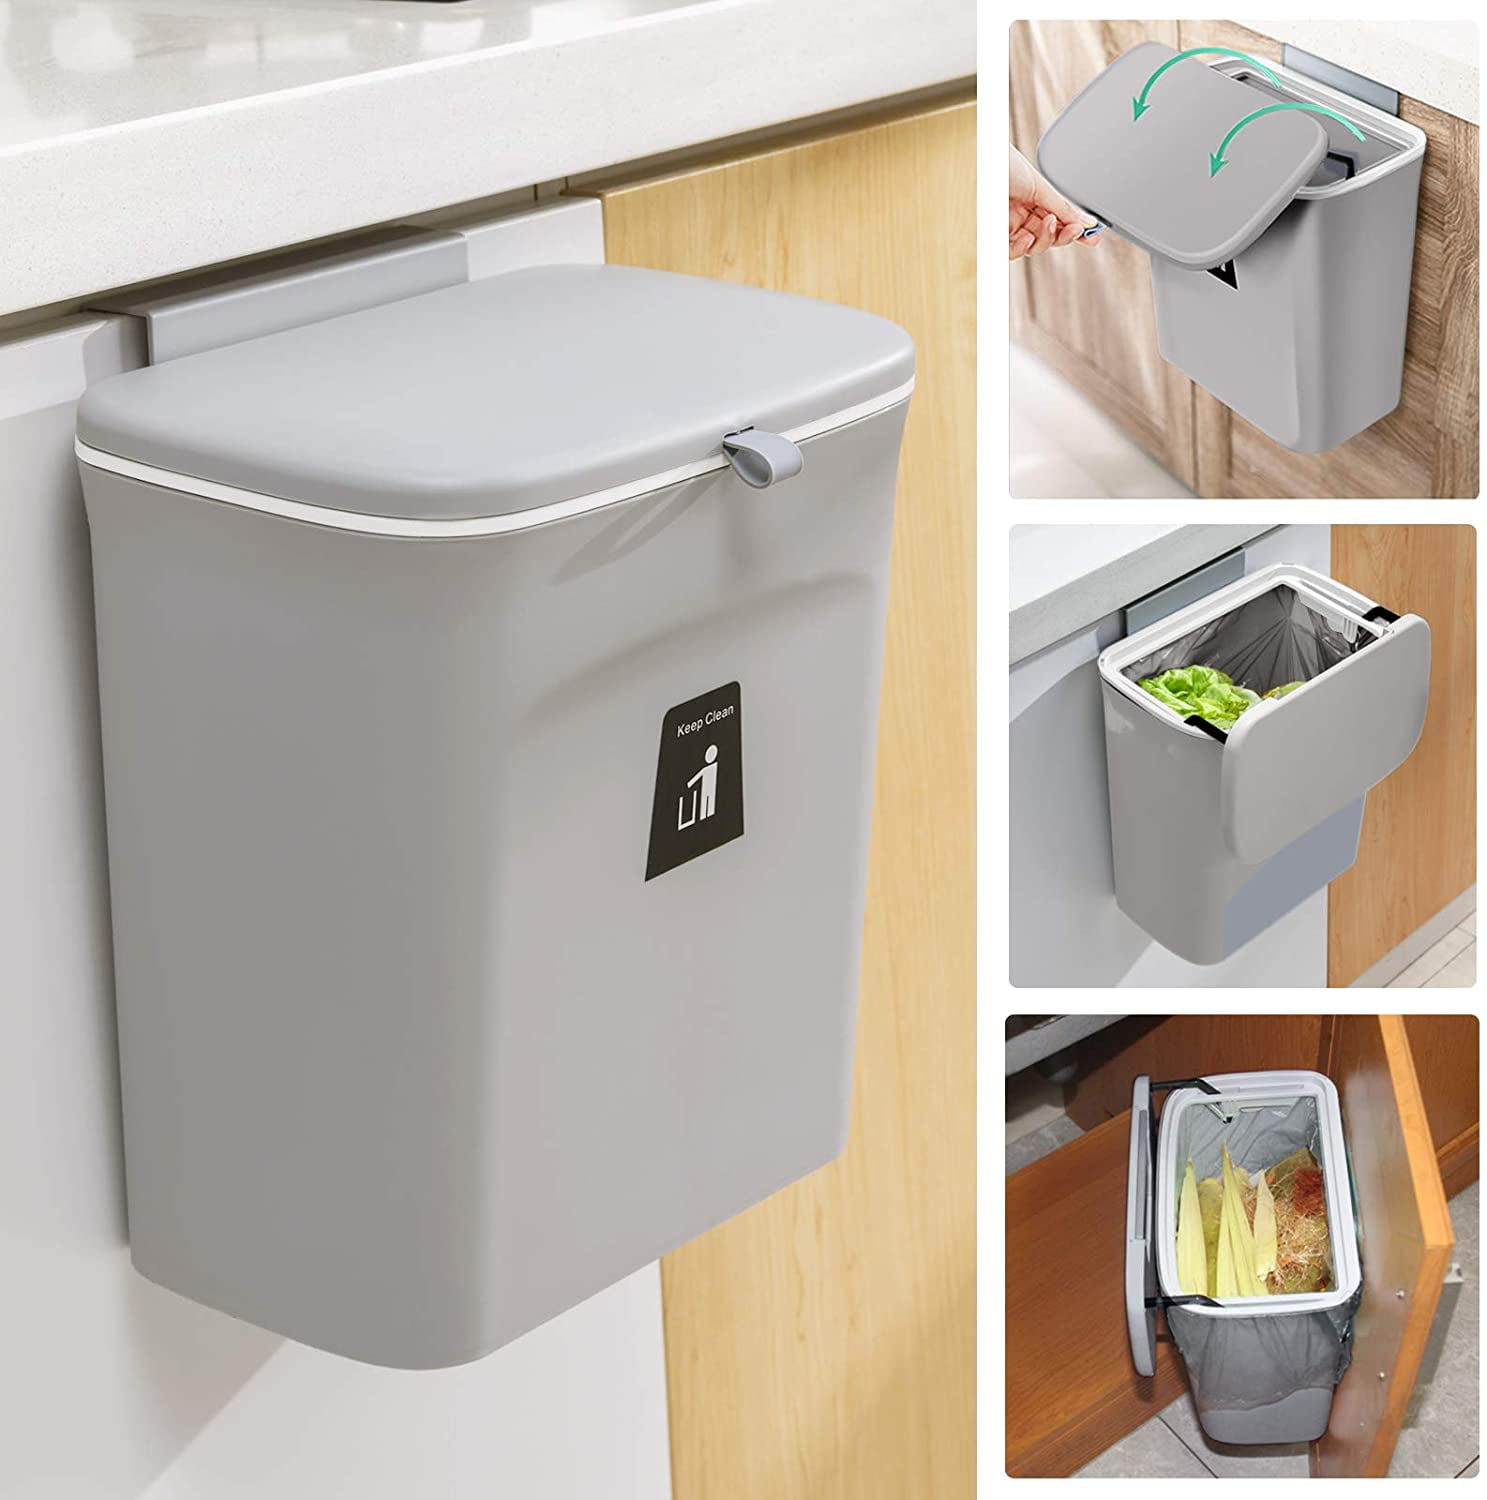 MYCLONG Kitchen Compost Bin for Counter Top or Under Sink, Hanging Small  Trash Can with Lid for Cupboard/Bathroom/Bedroom/Office/Camping, Mountable Indoor  Compost Bucket, White 